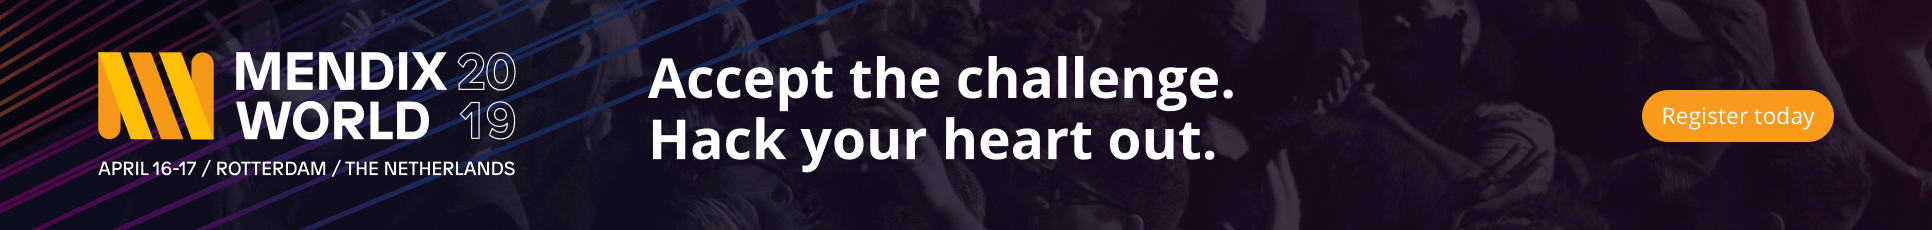 Accept the Challenge, hack your heart out - register today.